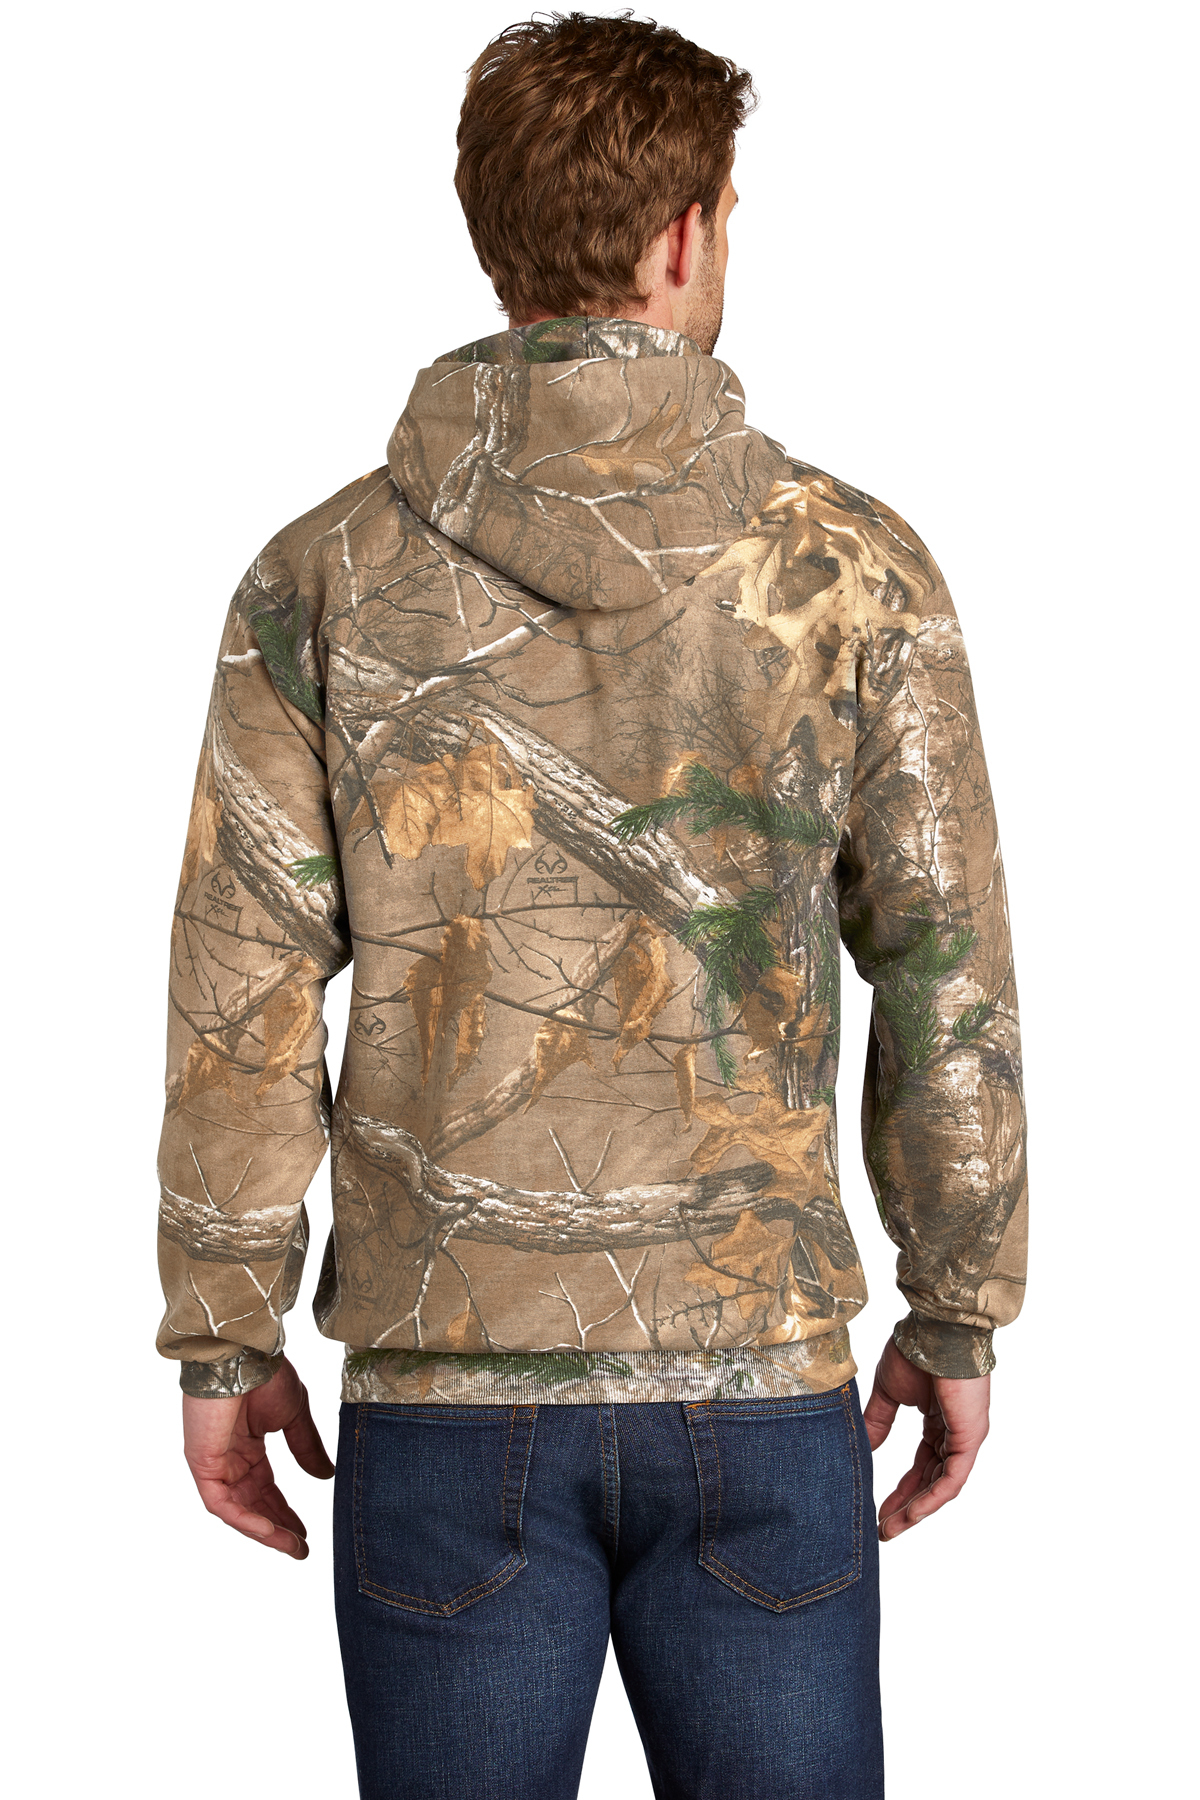 Russell Outdoors Mens S-3XL FULL or 1/4 ZIP Realtree XTRA Camo Sport Sweatshirts